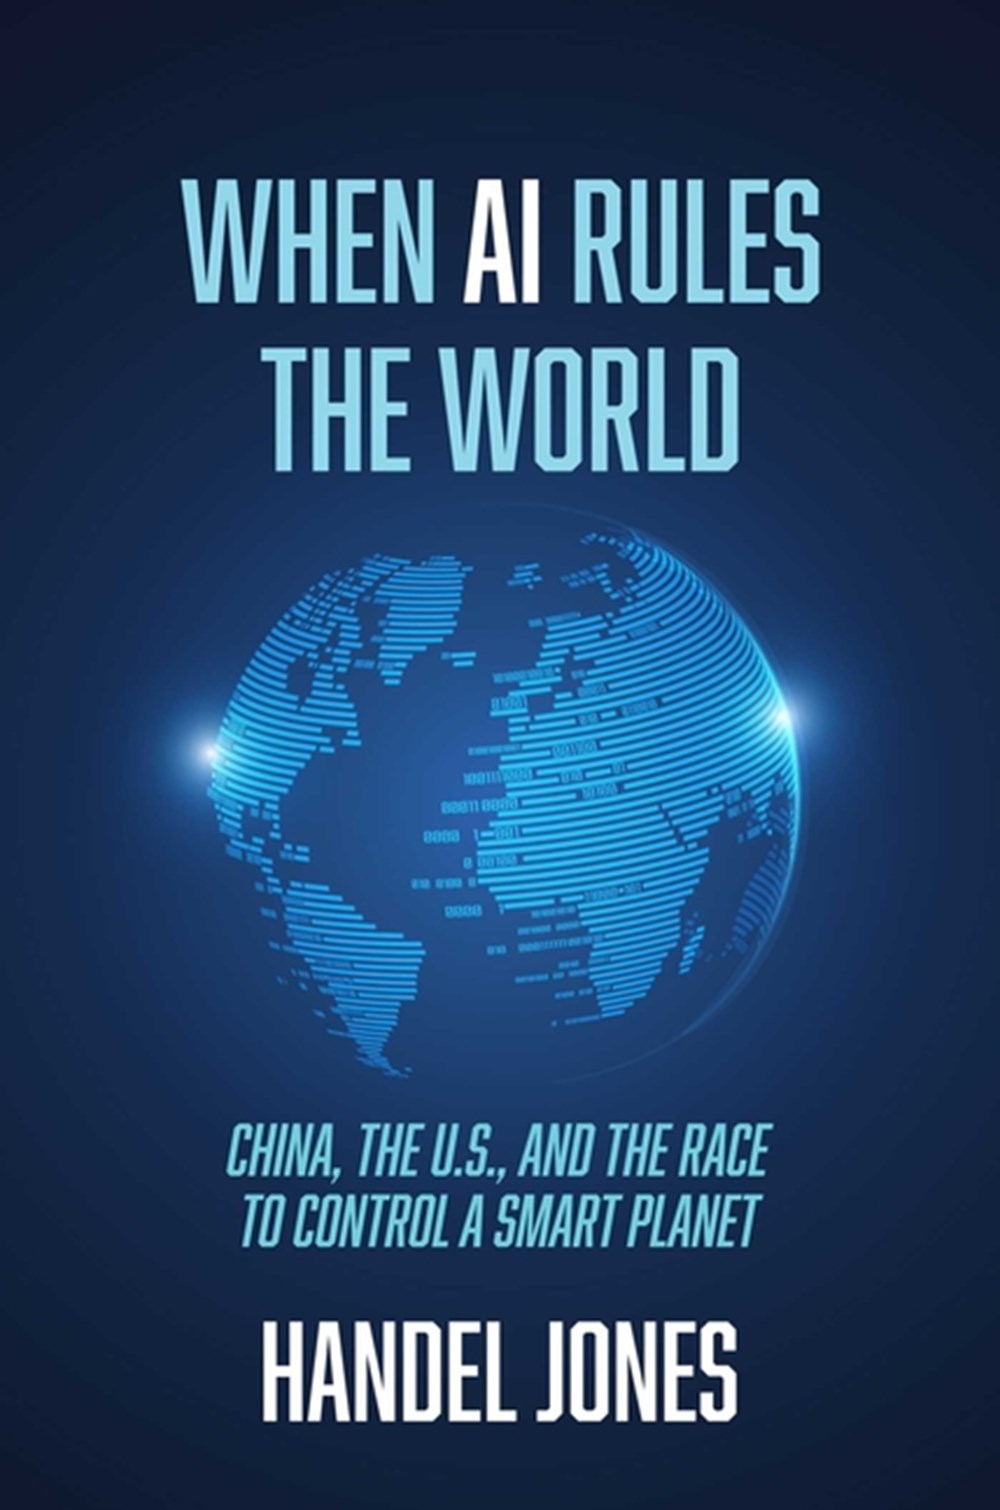 When AI Rules the World: China, the U.S., and the Race to Control a Smart Planet